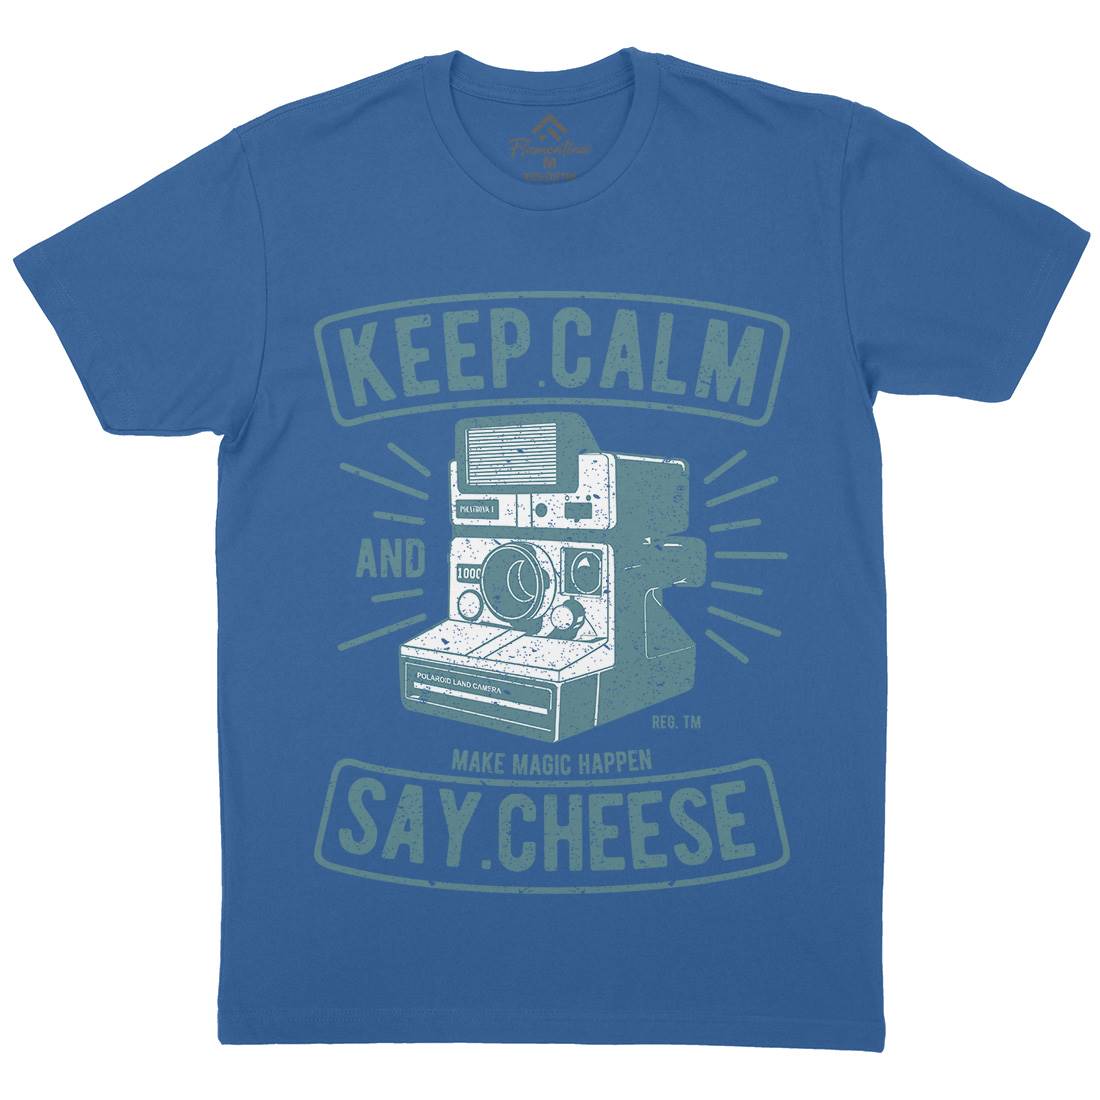 Keep Calm And Say Cheese Mens Organic Crew Neck T-Shirt Media A699